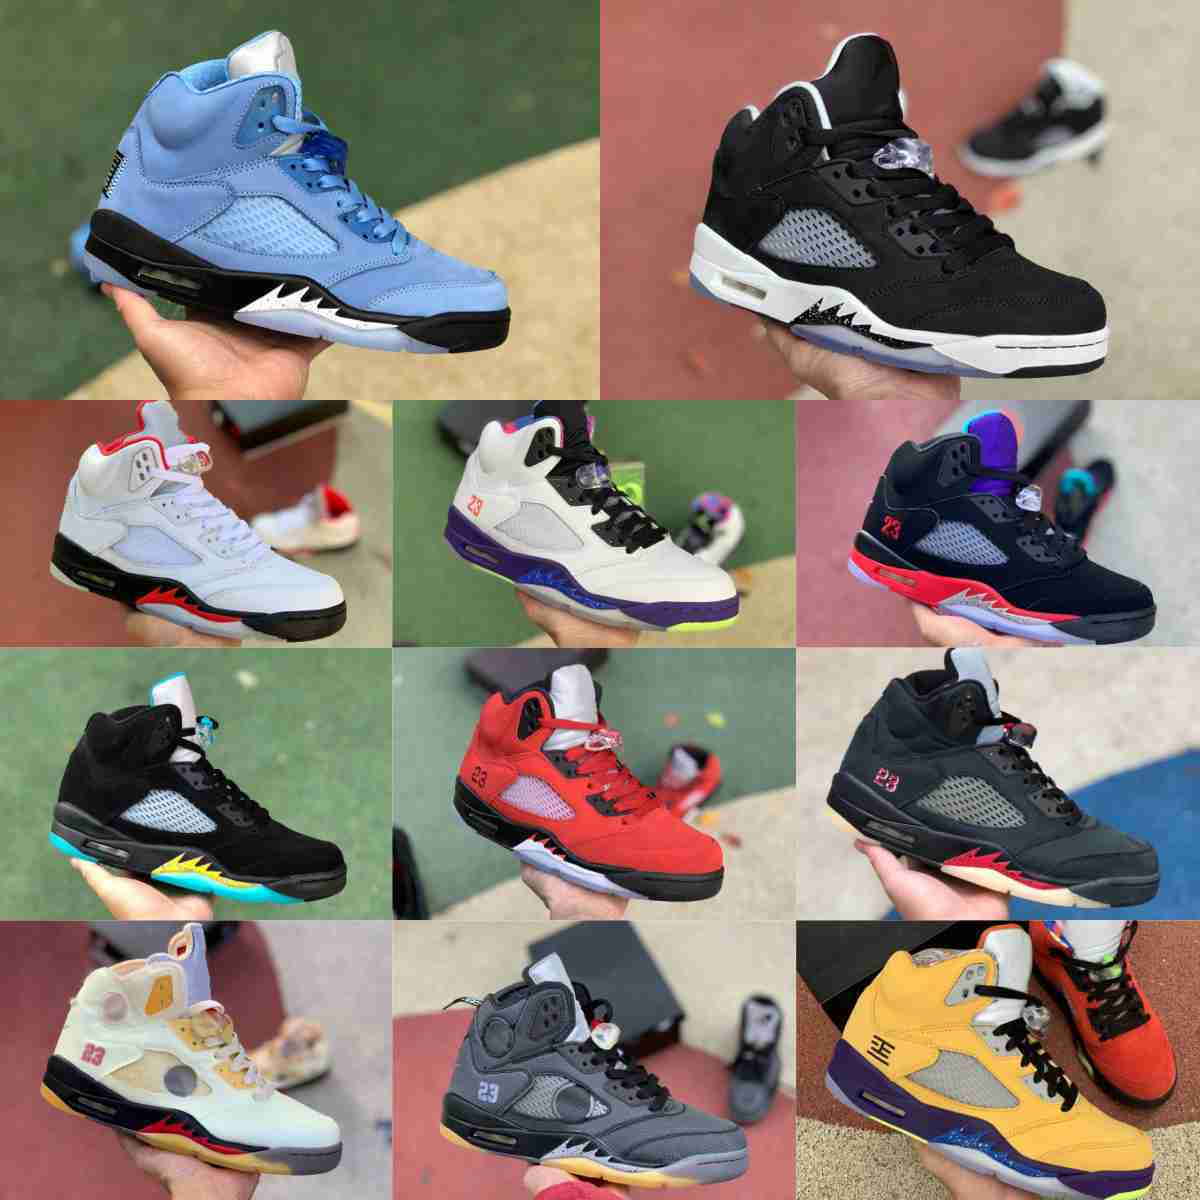 

Jumpman What The 5 5s High Basketball Shoes Mens Metallic Silver Sail Muslin Retros Raging Bull Red TOP 3 Blue UNC Aqua Oreo Hyper Royal Bred Wings Trainer Sneakers S8, Please contact us